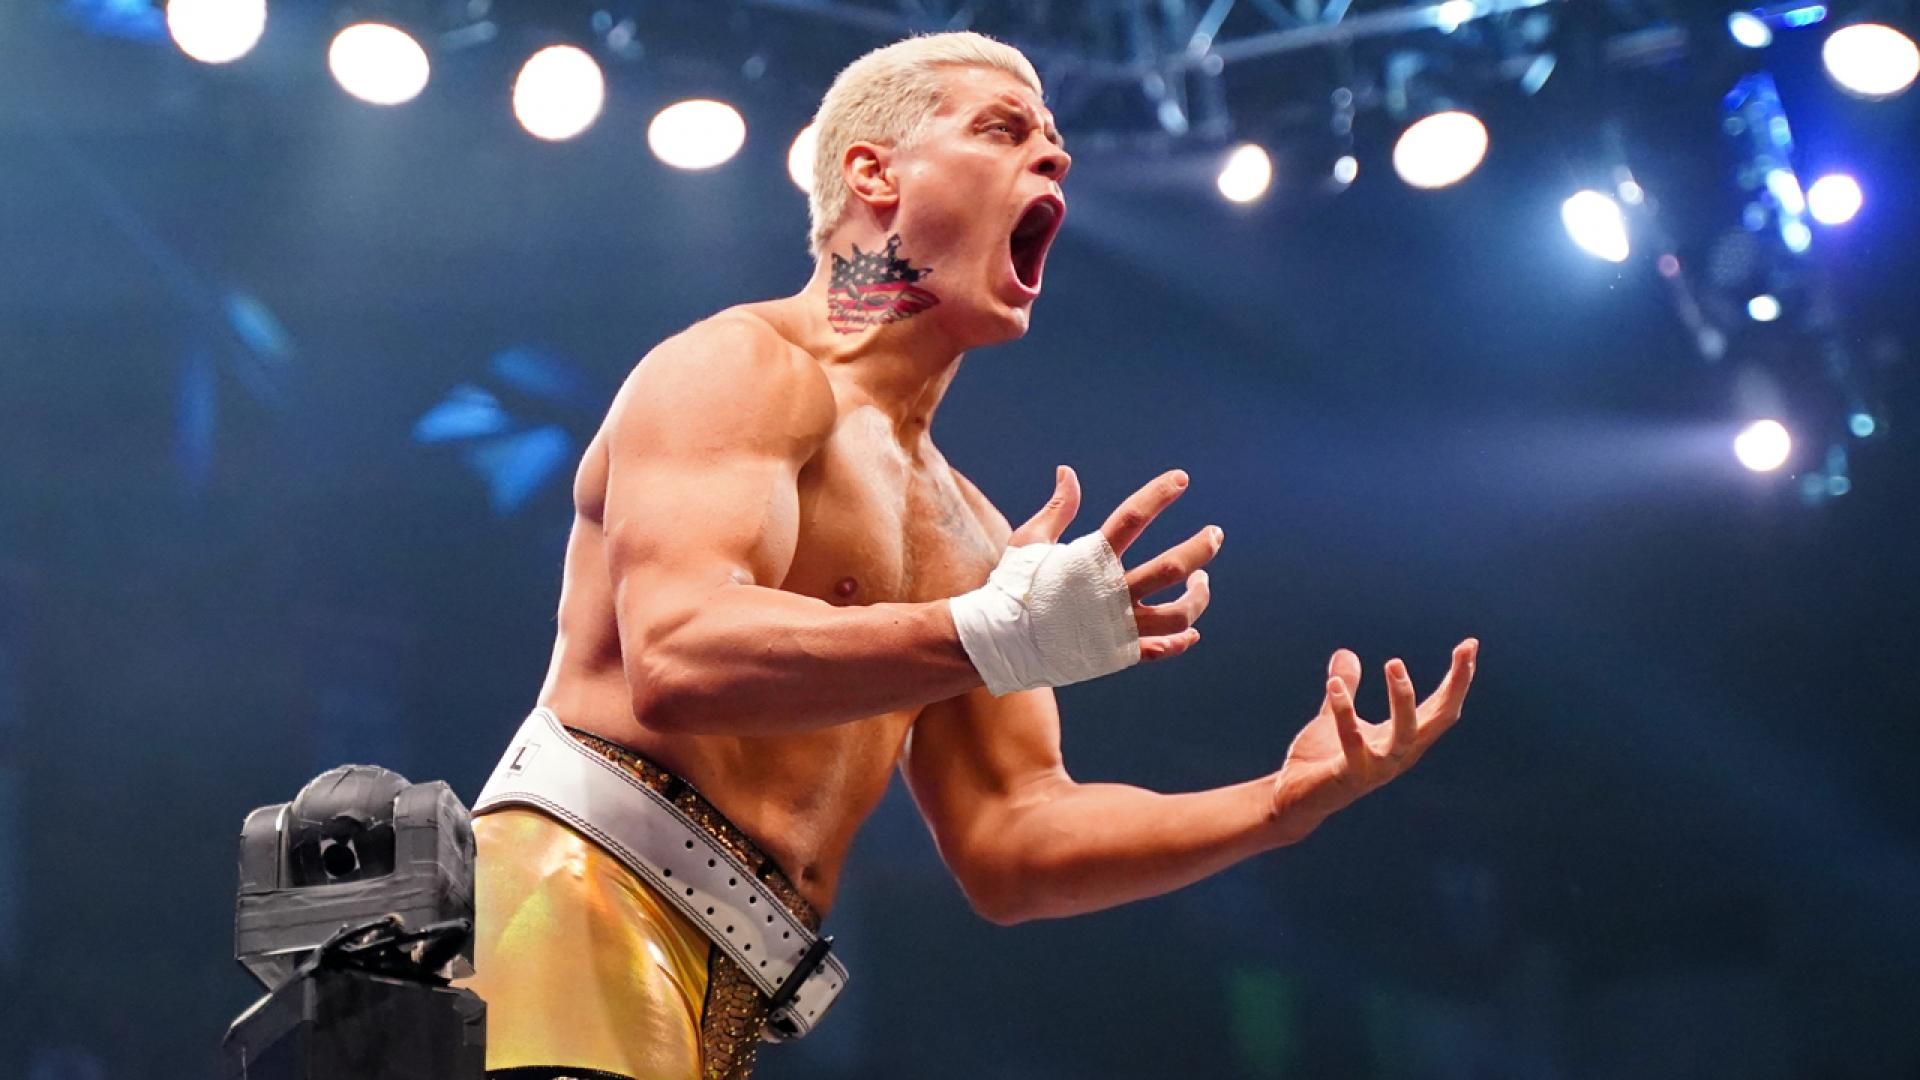 Cody Rhodes Returning To WWE Would Change The Wrestling Landscape Forever